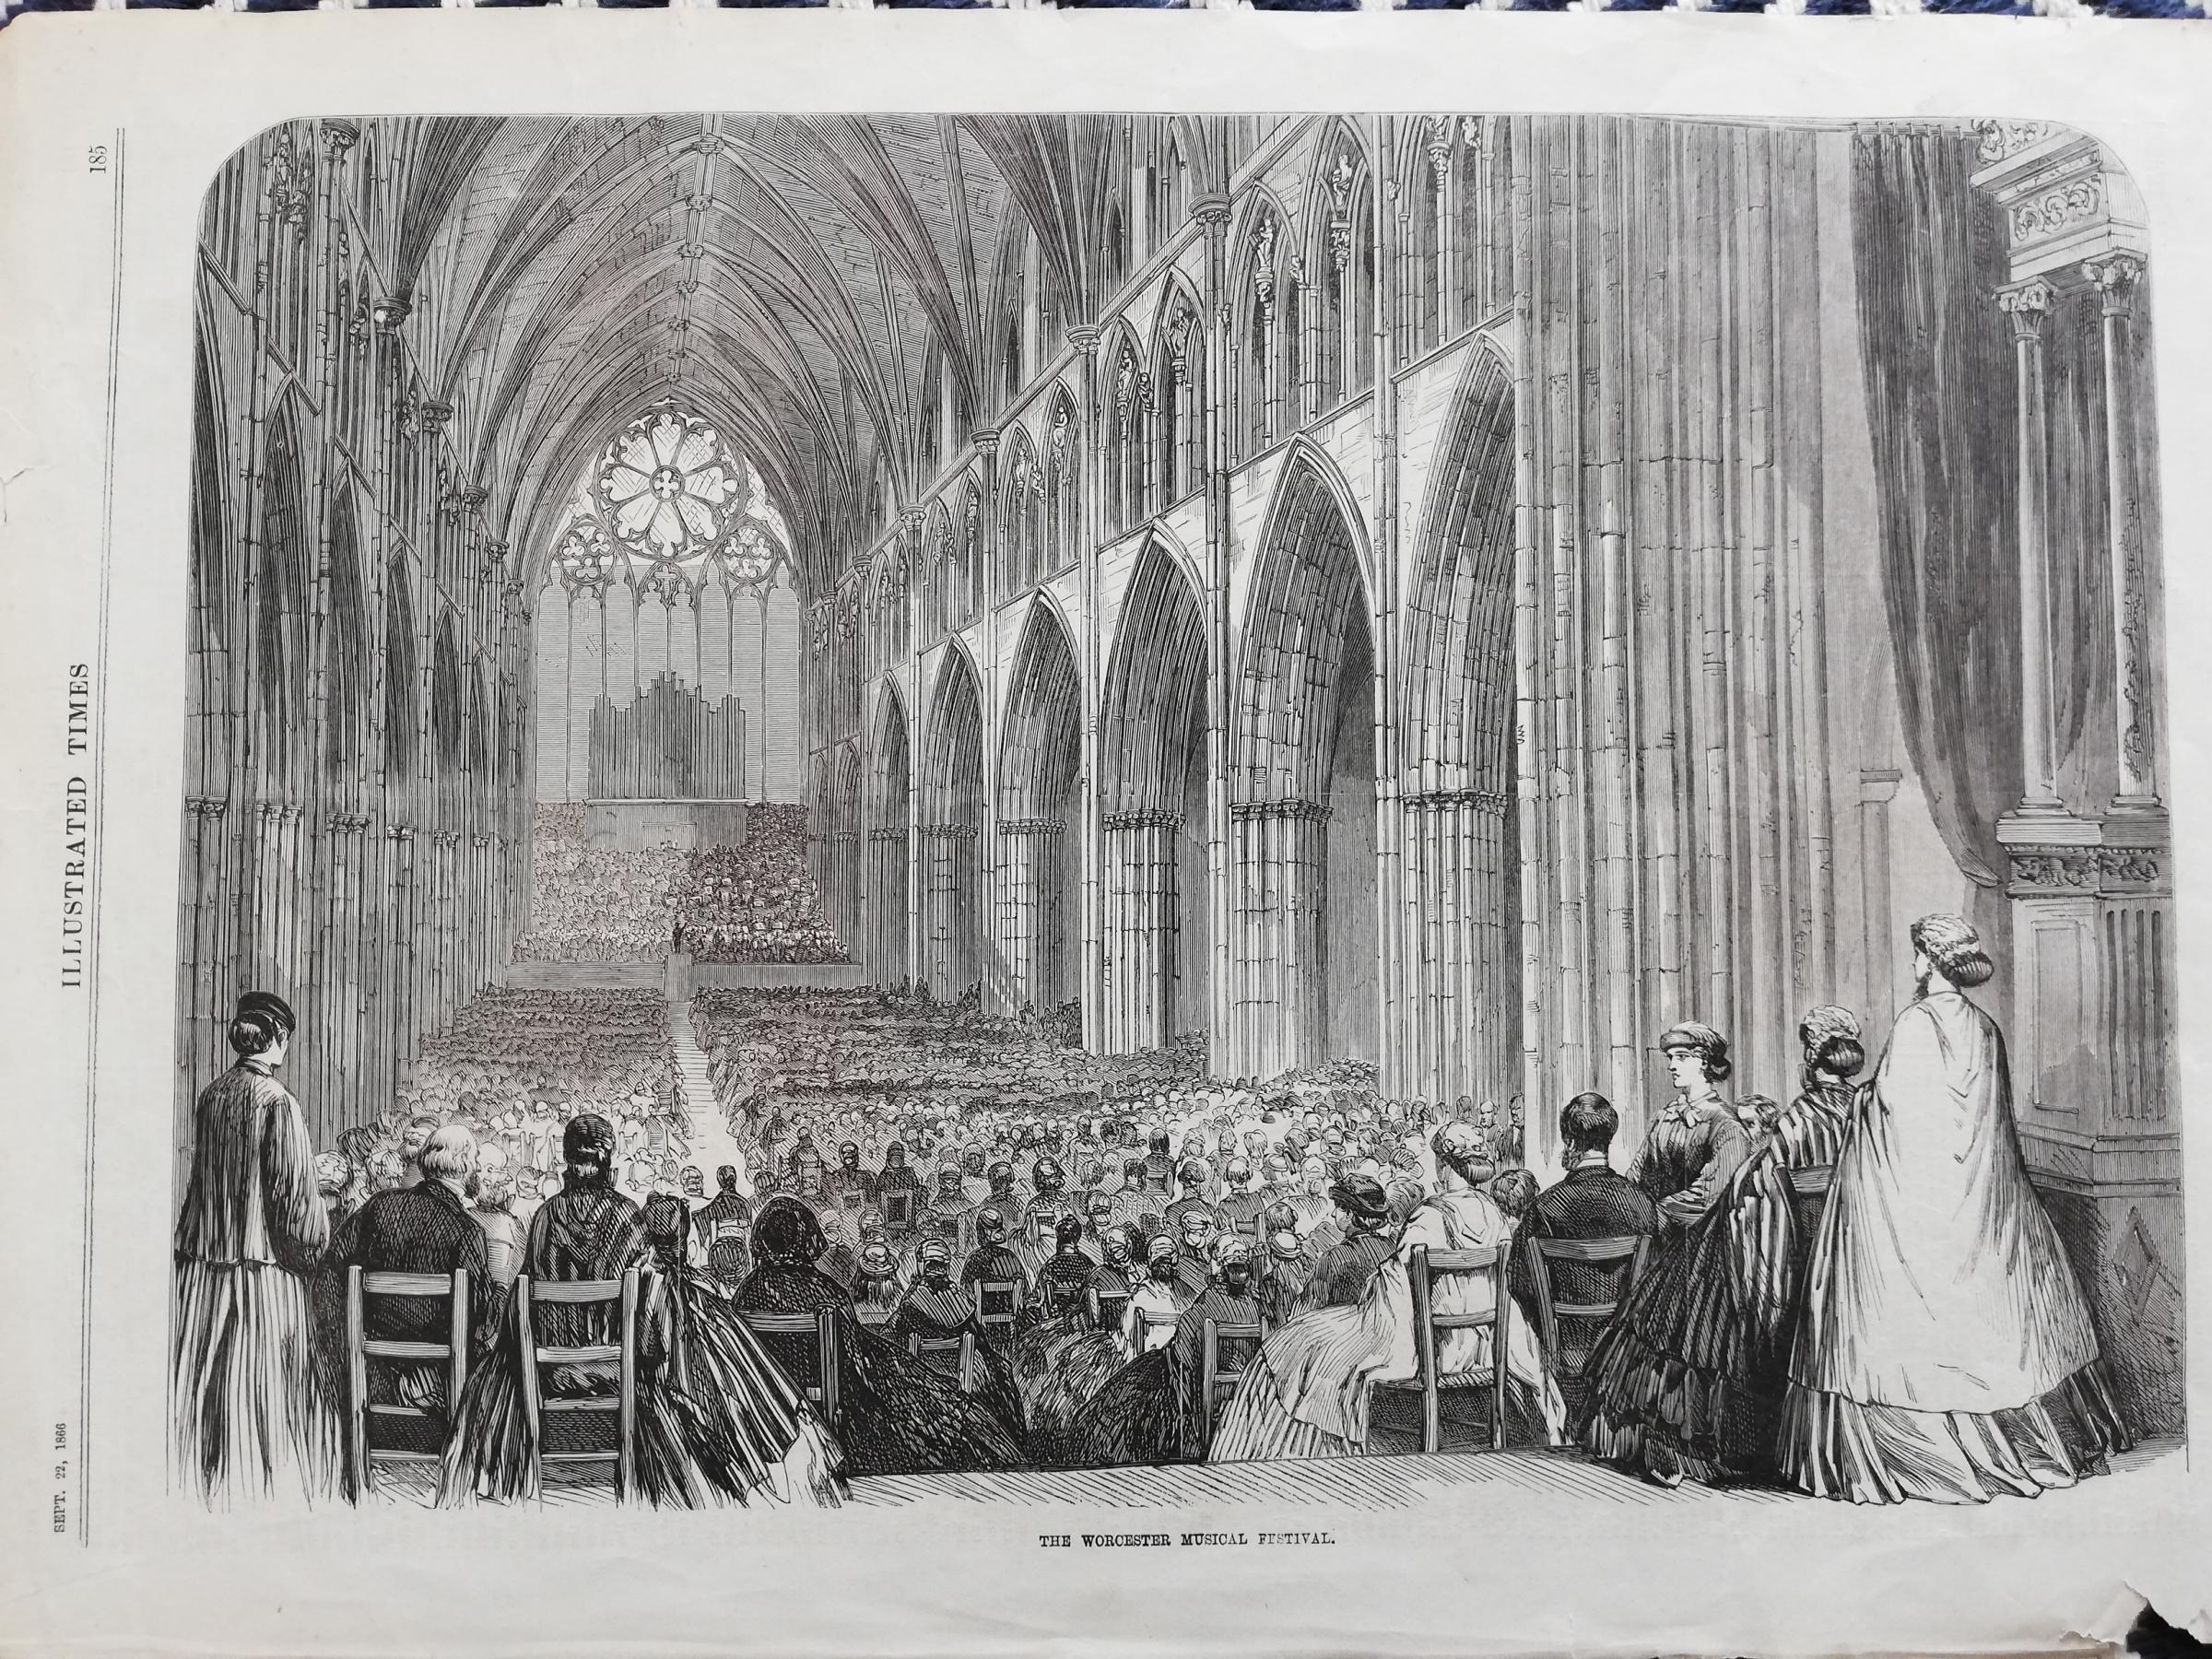 Worcester Cathedral hosts the Three Choirs Festival in 1866. Image from Illustrated London News